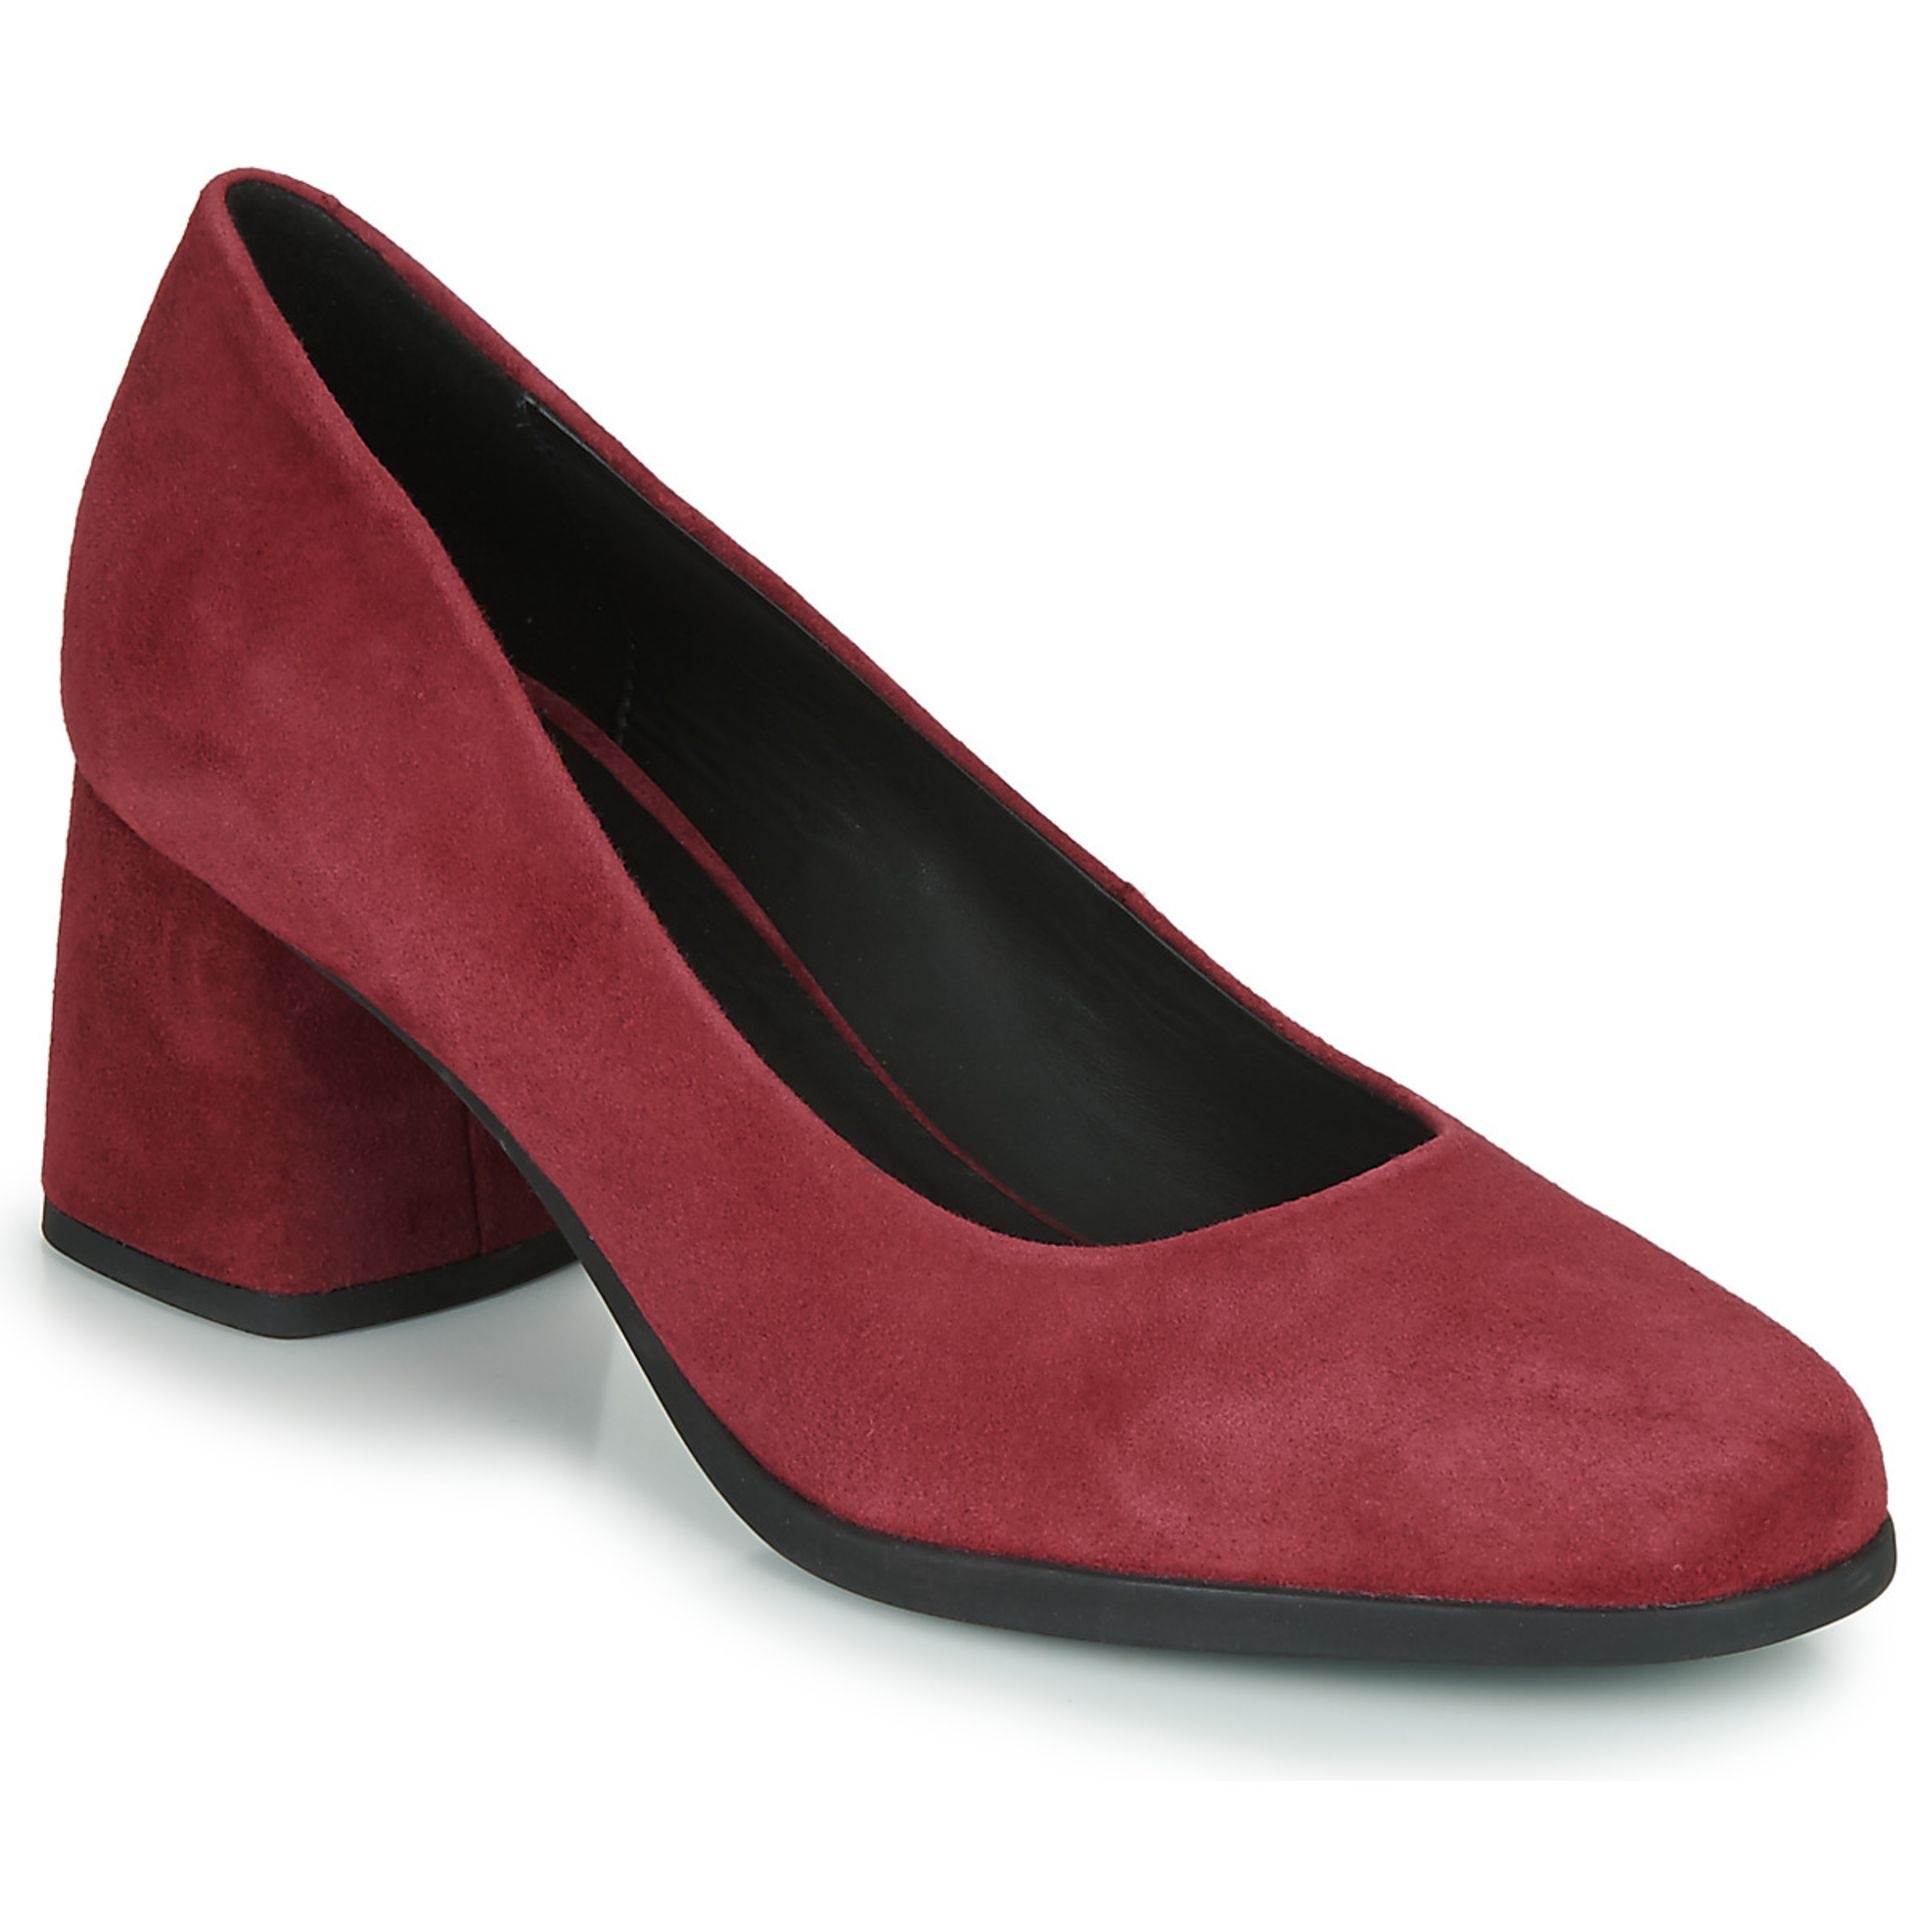 Geox D CALINDA MID GOAT SUEDE - WINE COLOUR RRP £90 SIZE UK 5Condition ReportBRAND NEW BOXED